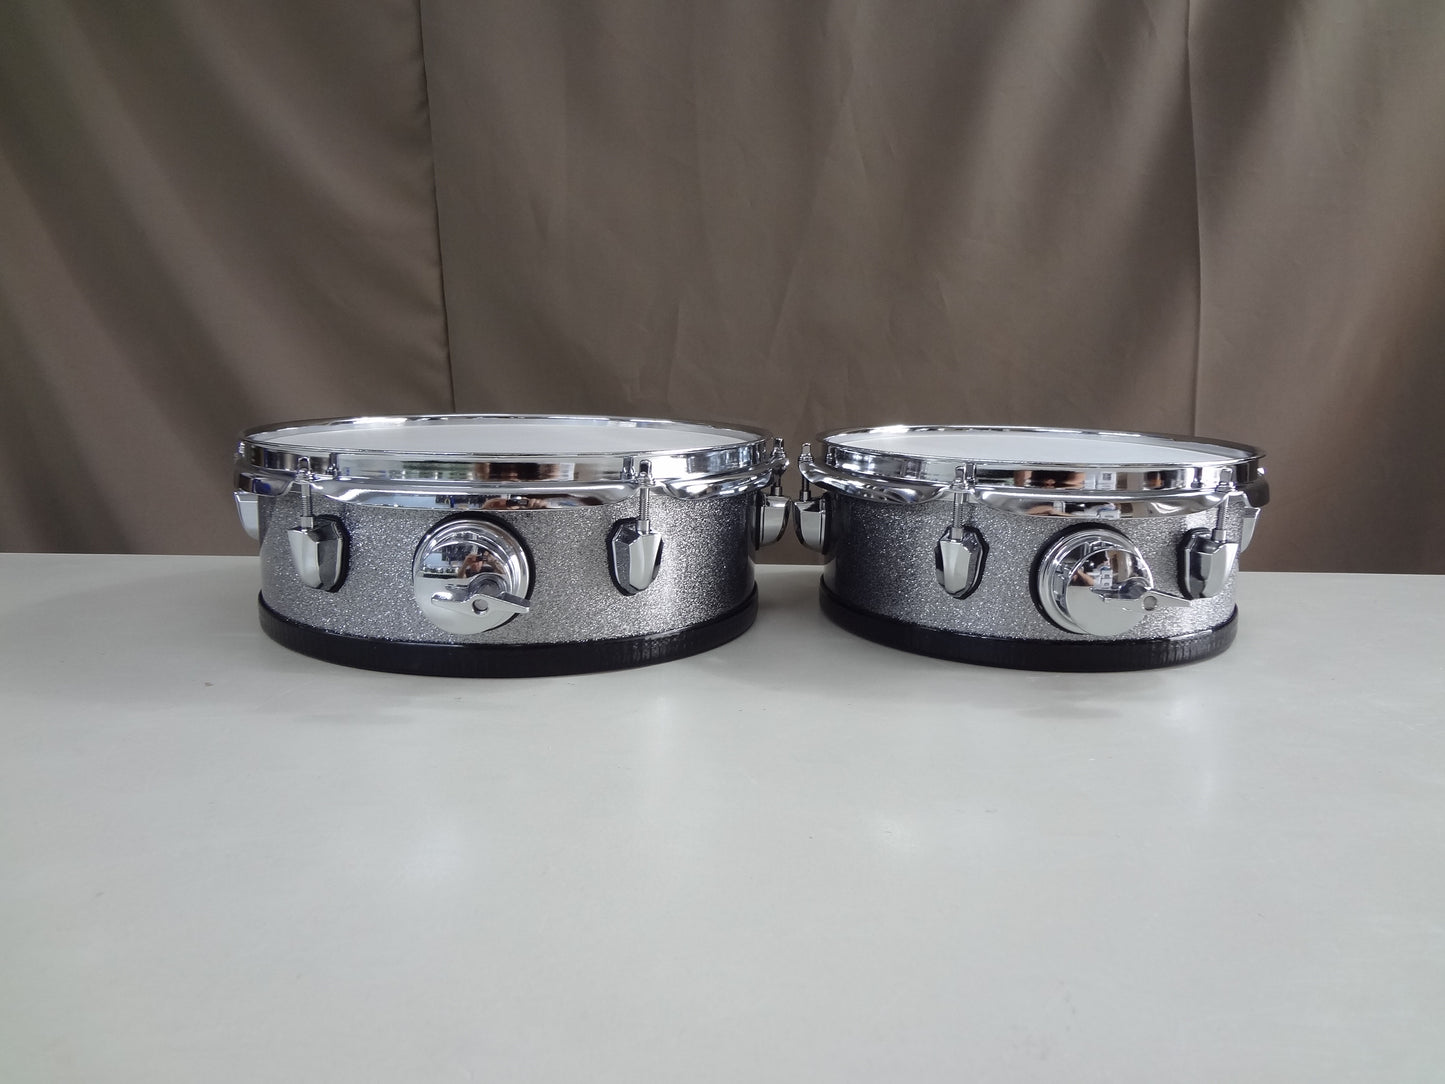 4 PIECE CUSTOM ELECTRONIC DRUM SHELL PACK - SILVER SPARKLE